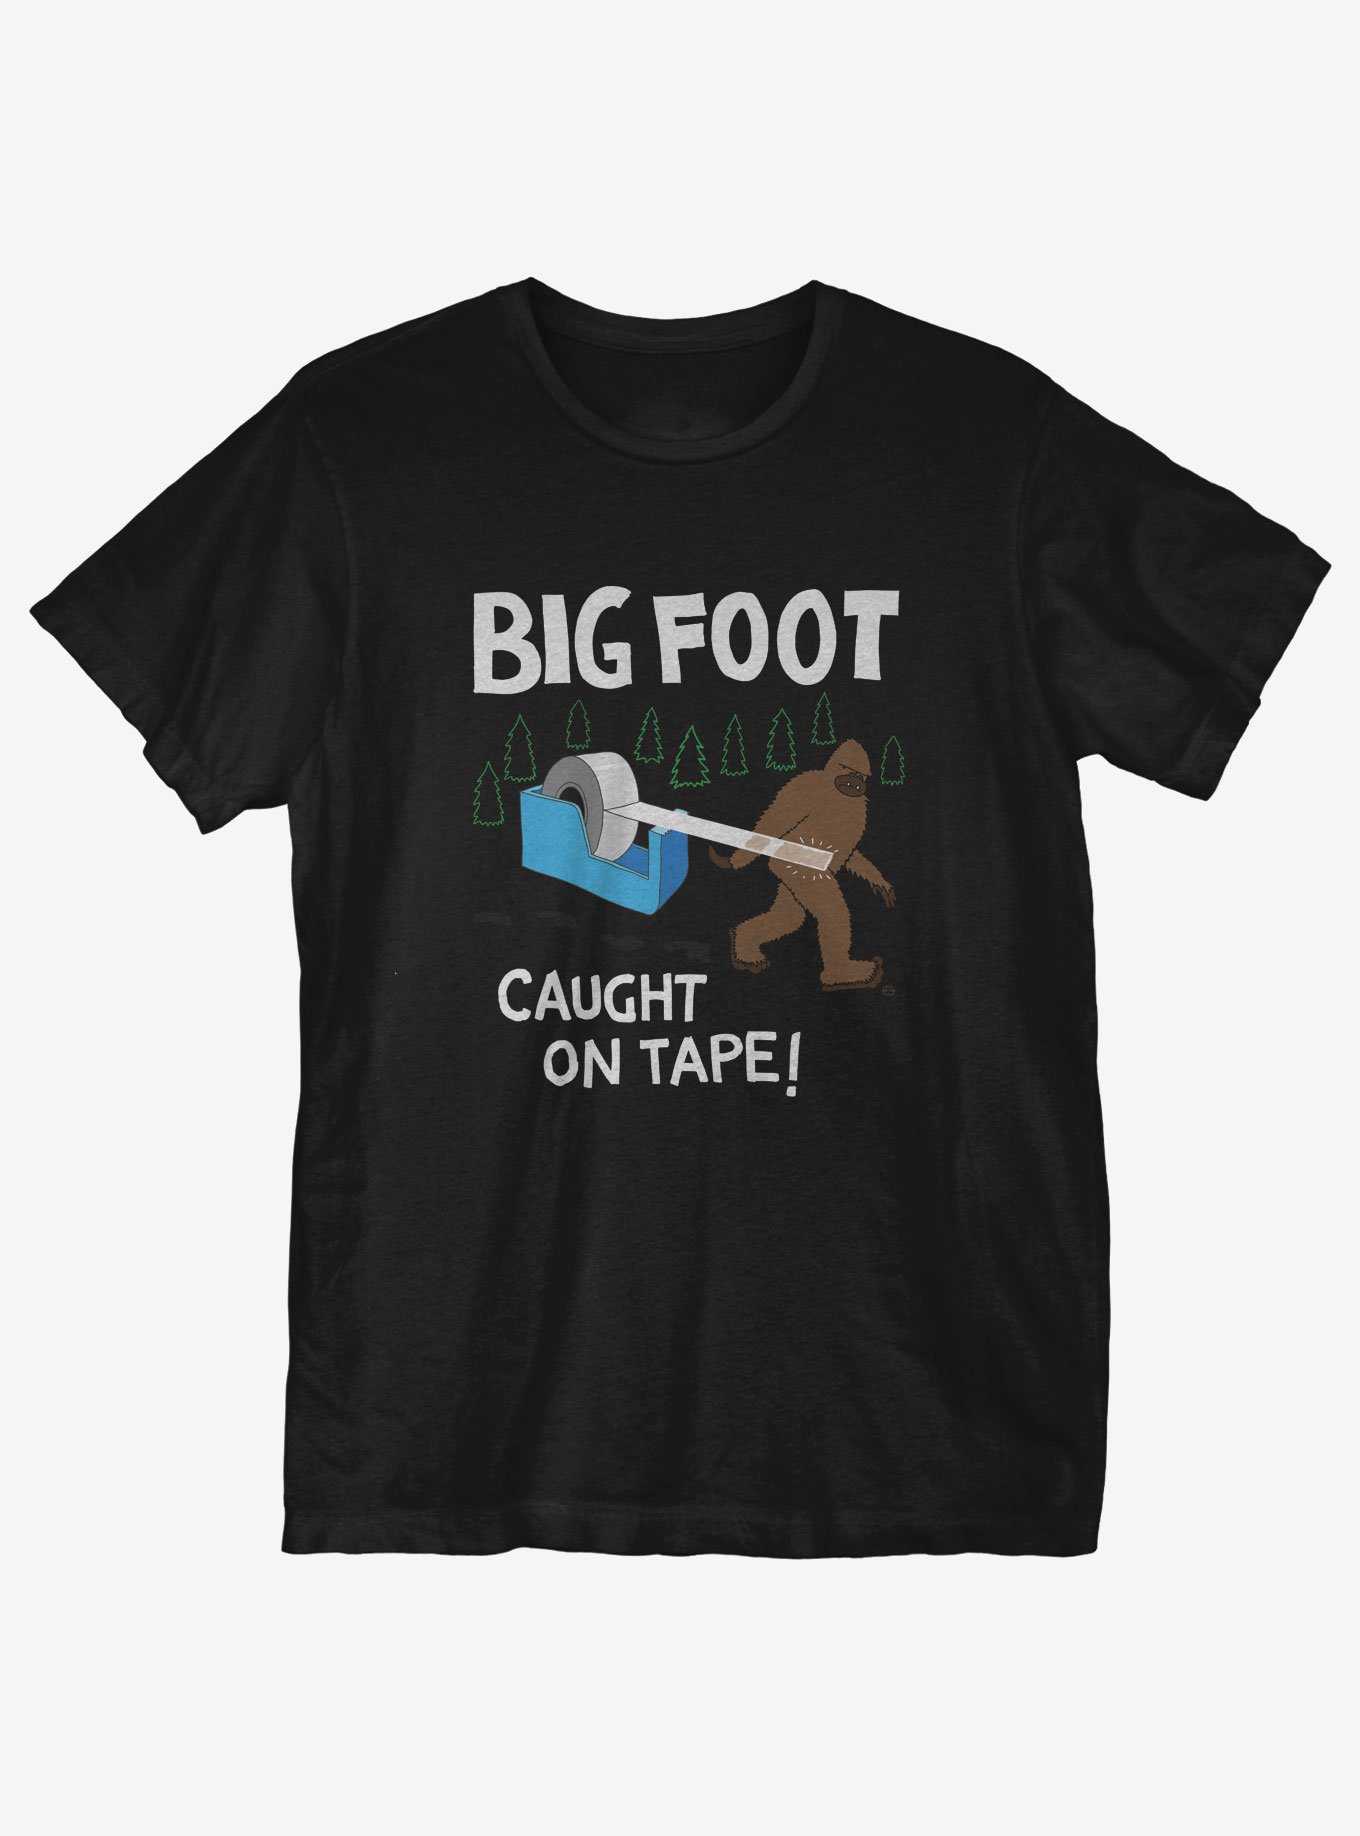 Caught on Tape T-Shirt, , hi-res